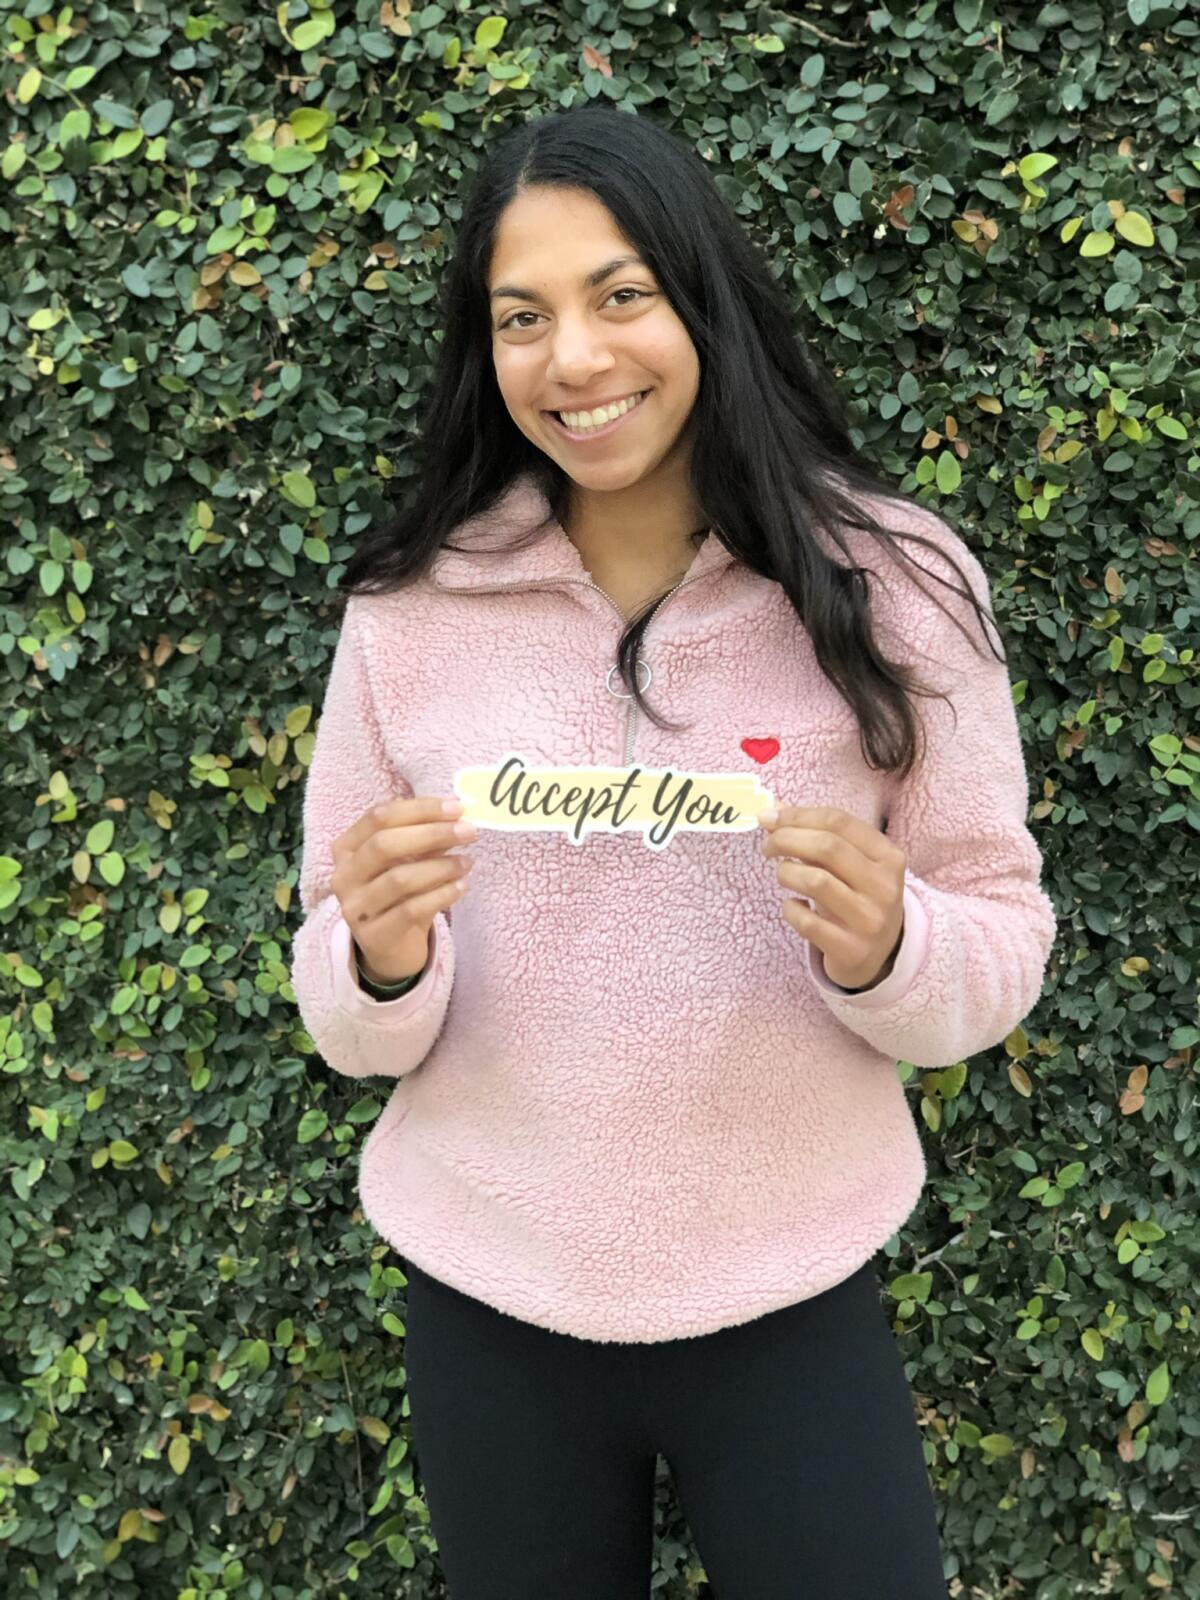 CCA sophomore Karina Parikh created a line of stickers with positive messages for teens.